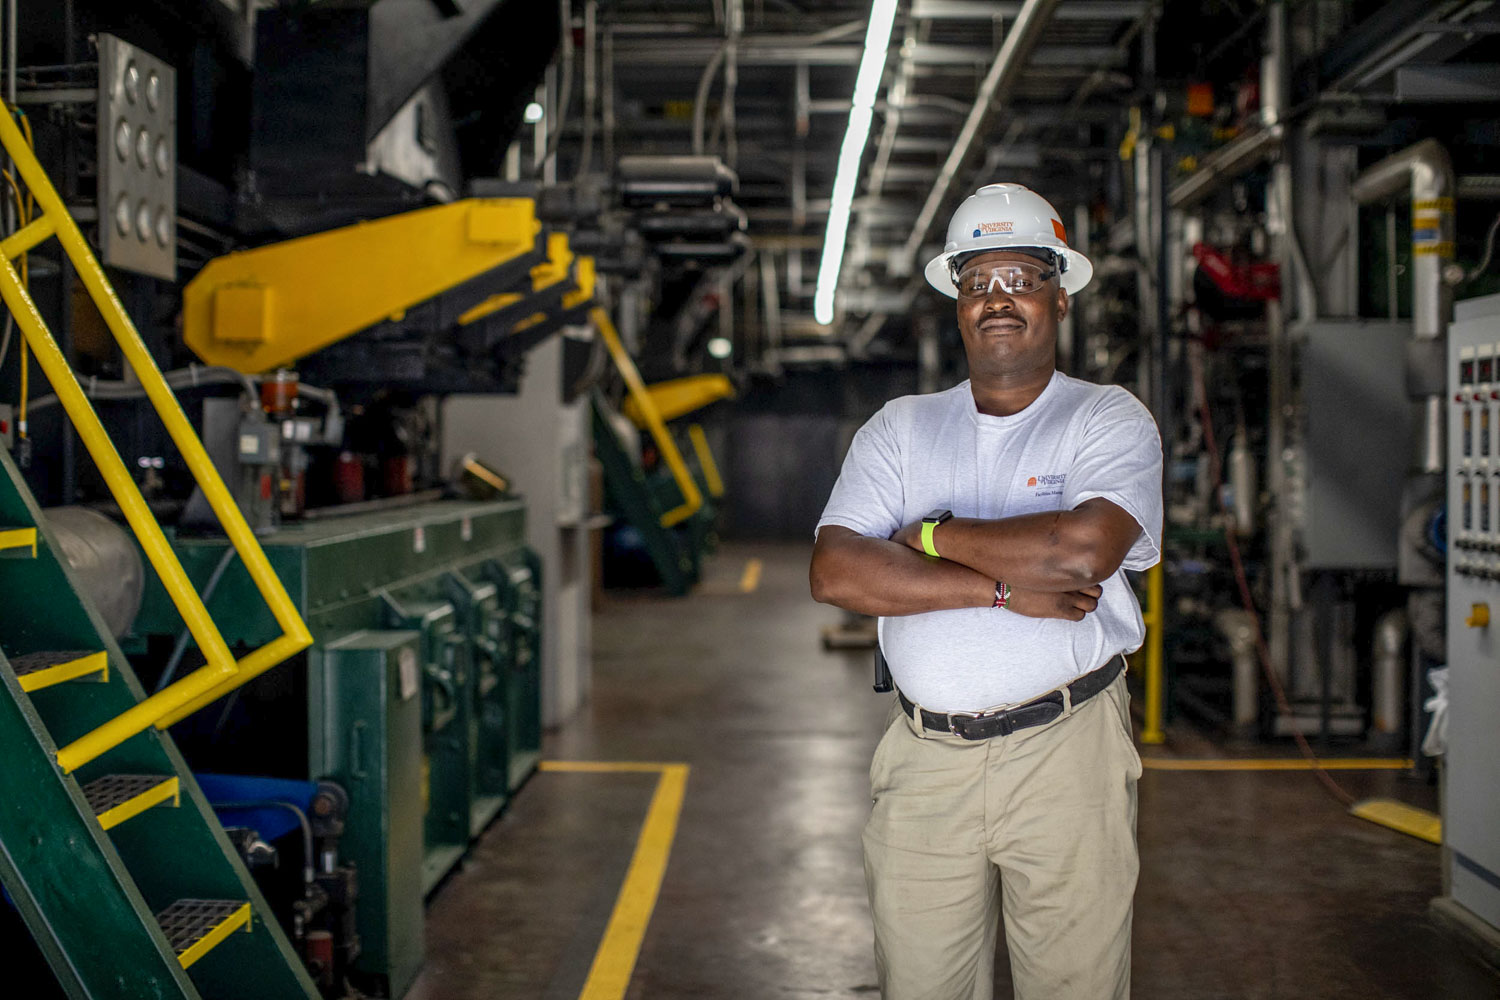 Peter Chege stands with a hardhat in a mechanical room